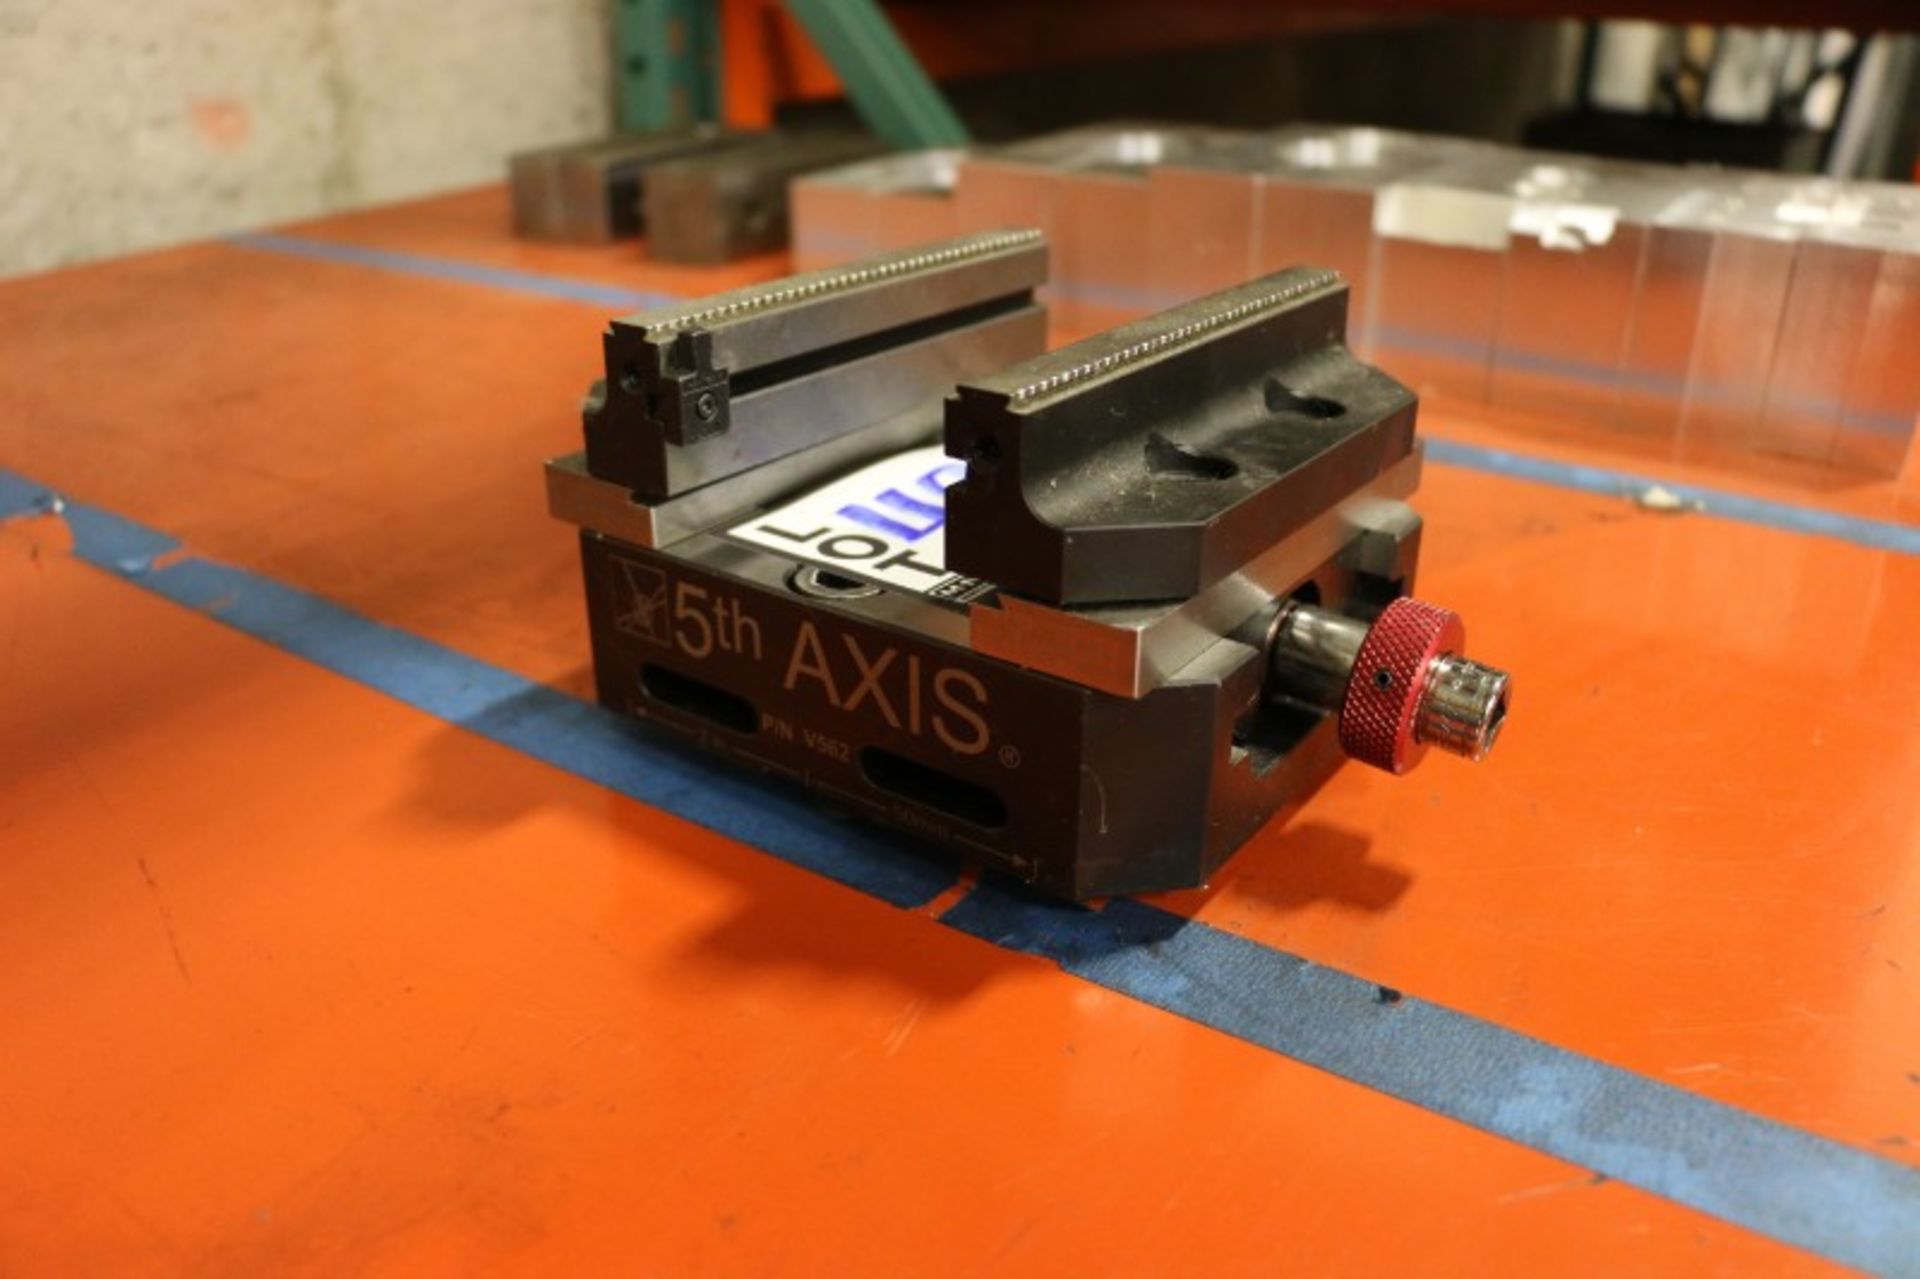 5th Axis Vise - Image 4 of 4